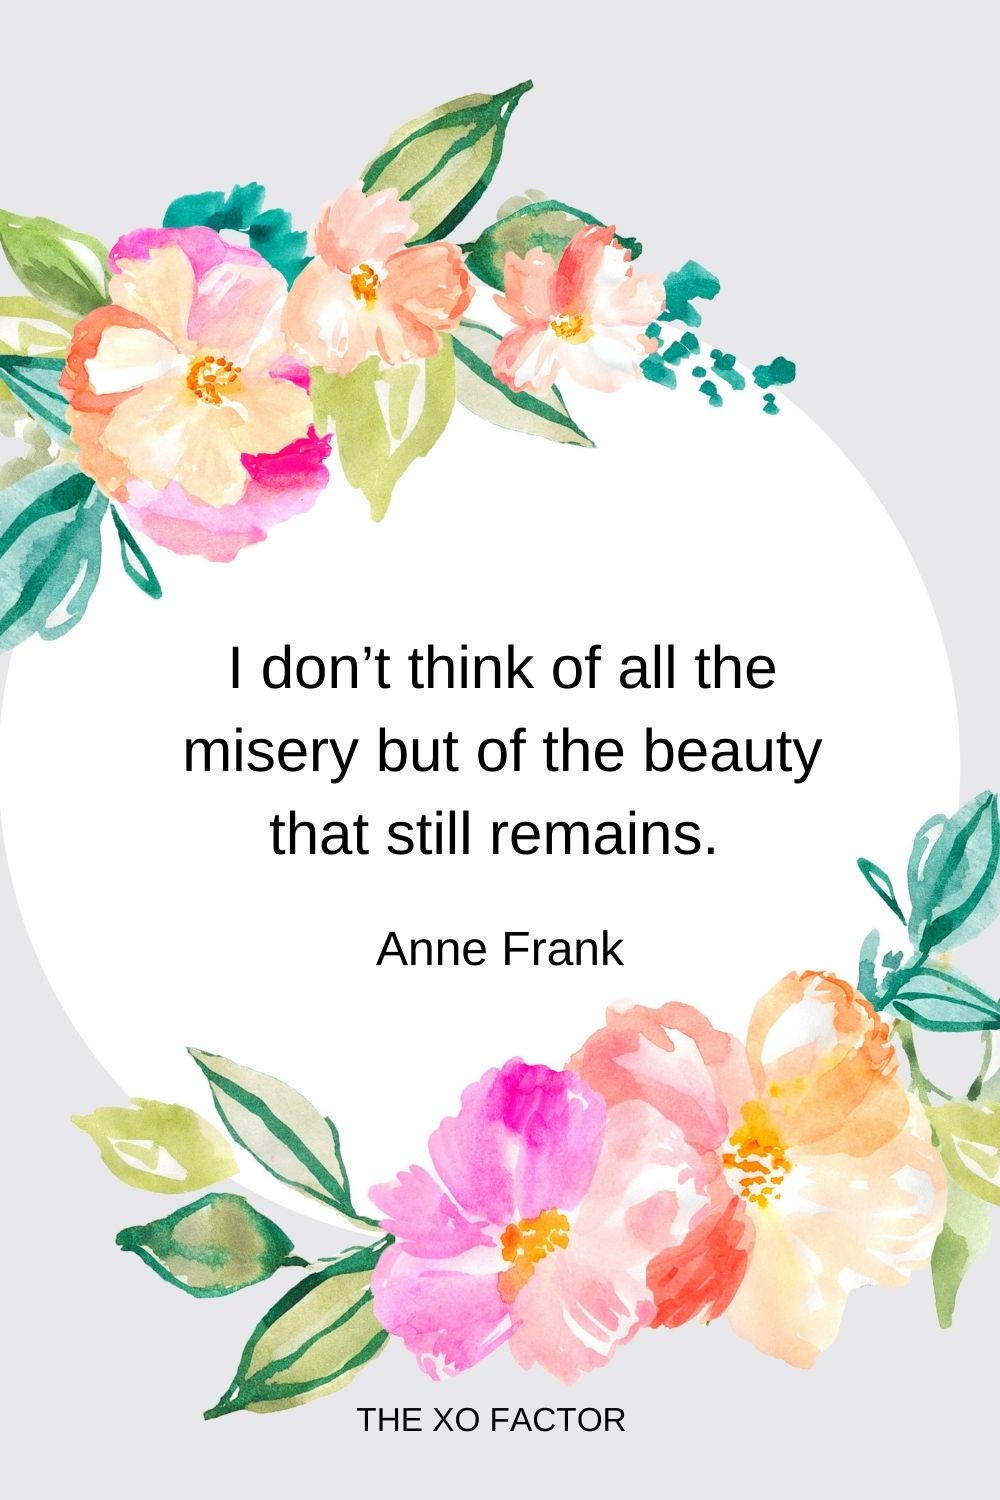 I don’t think of all the misery but of the beauty that still remains.  Anne Frank